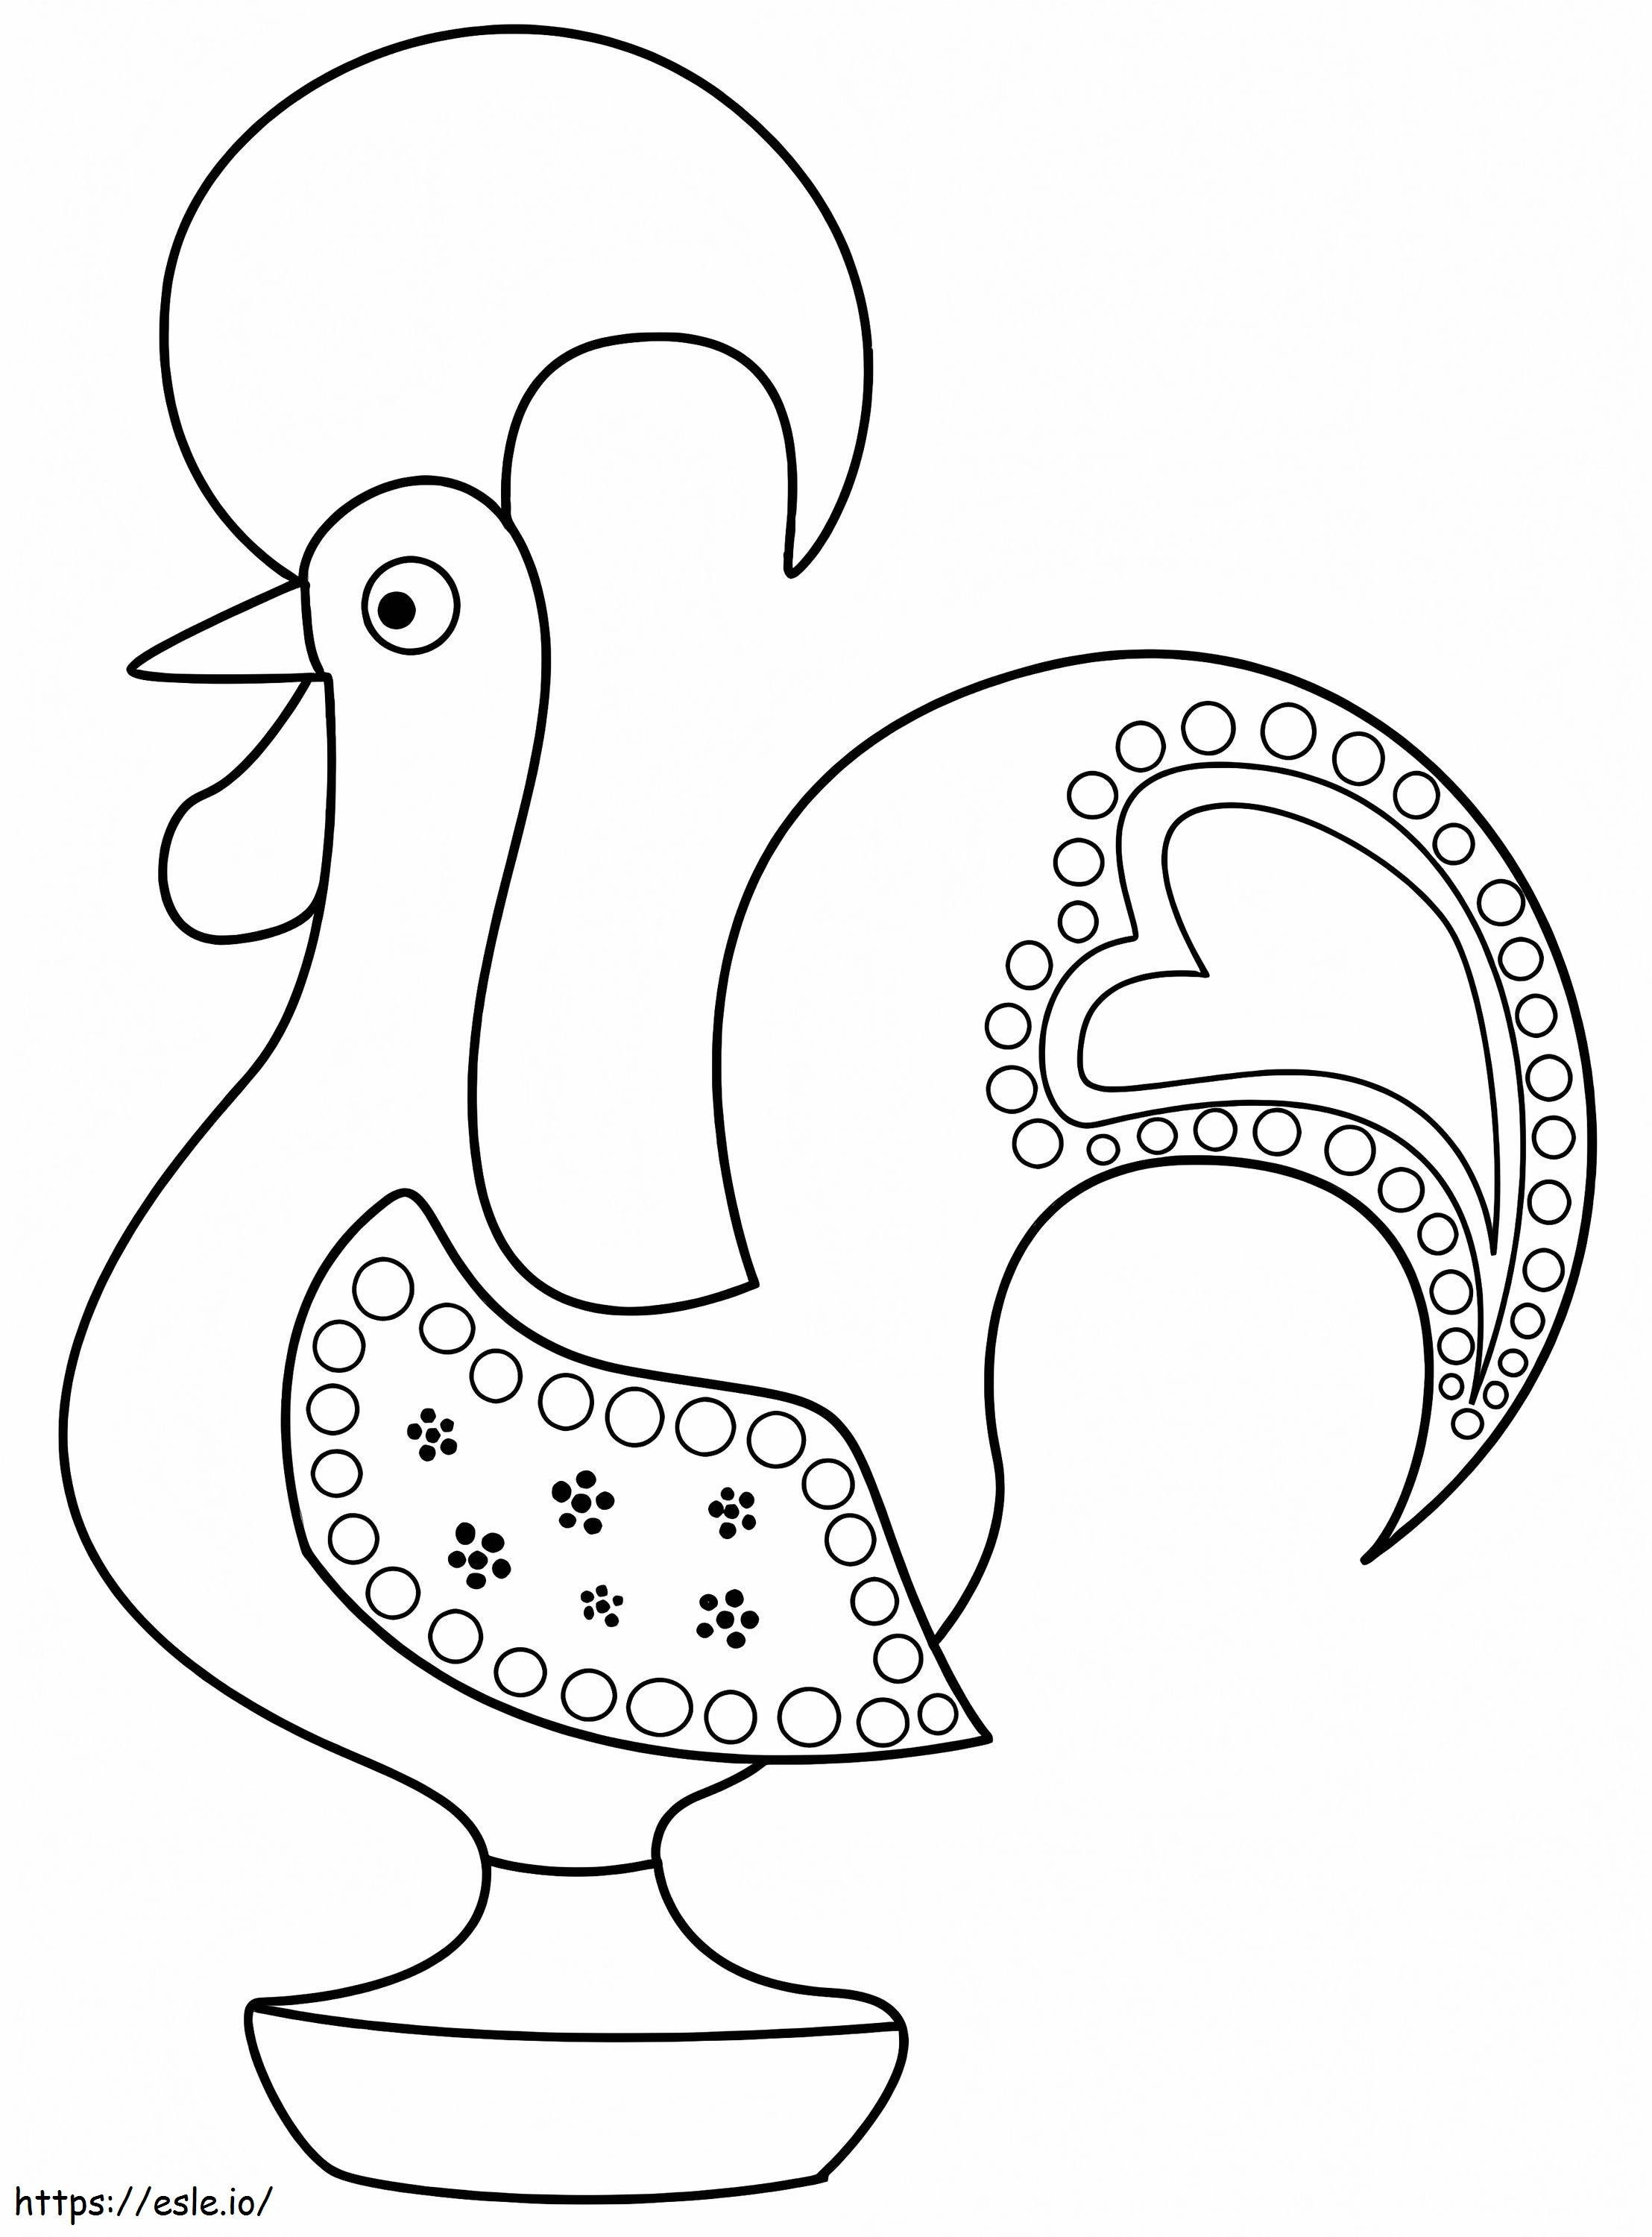 Portuguese Rooster 3 coloring page